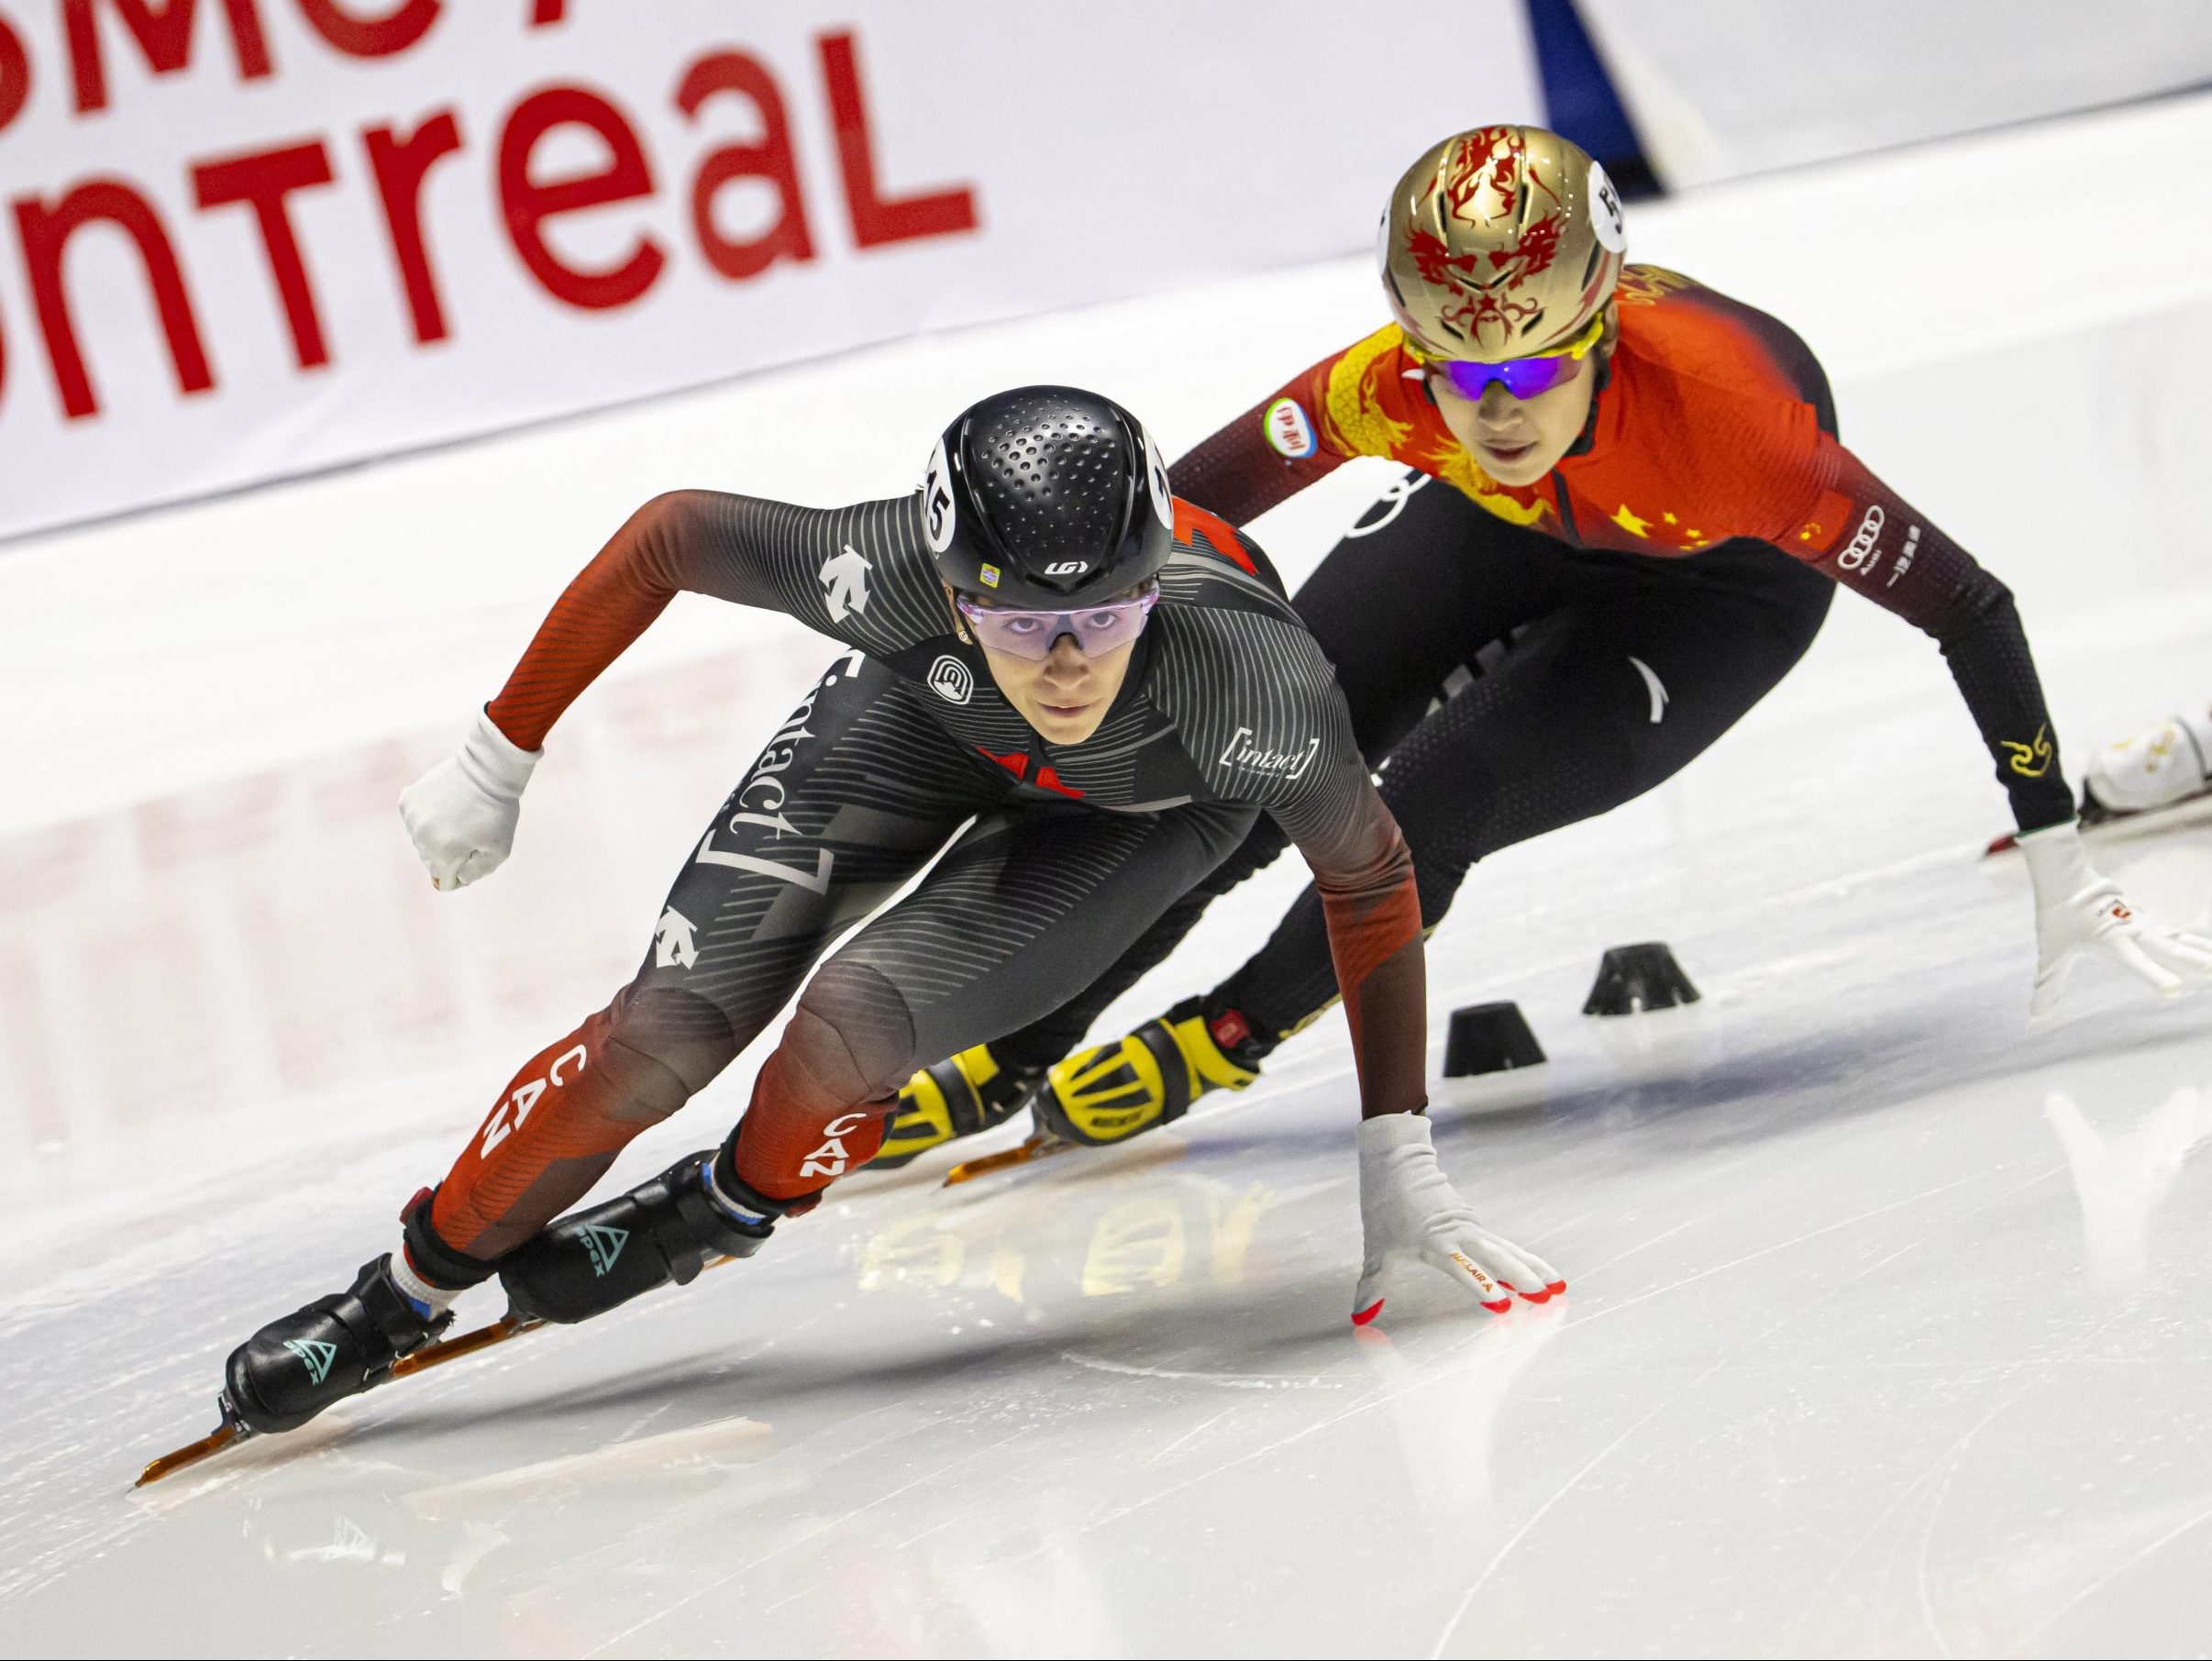 Short track speed skater Rikki Doak learned a lesson that is pushing her to the finish line